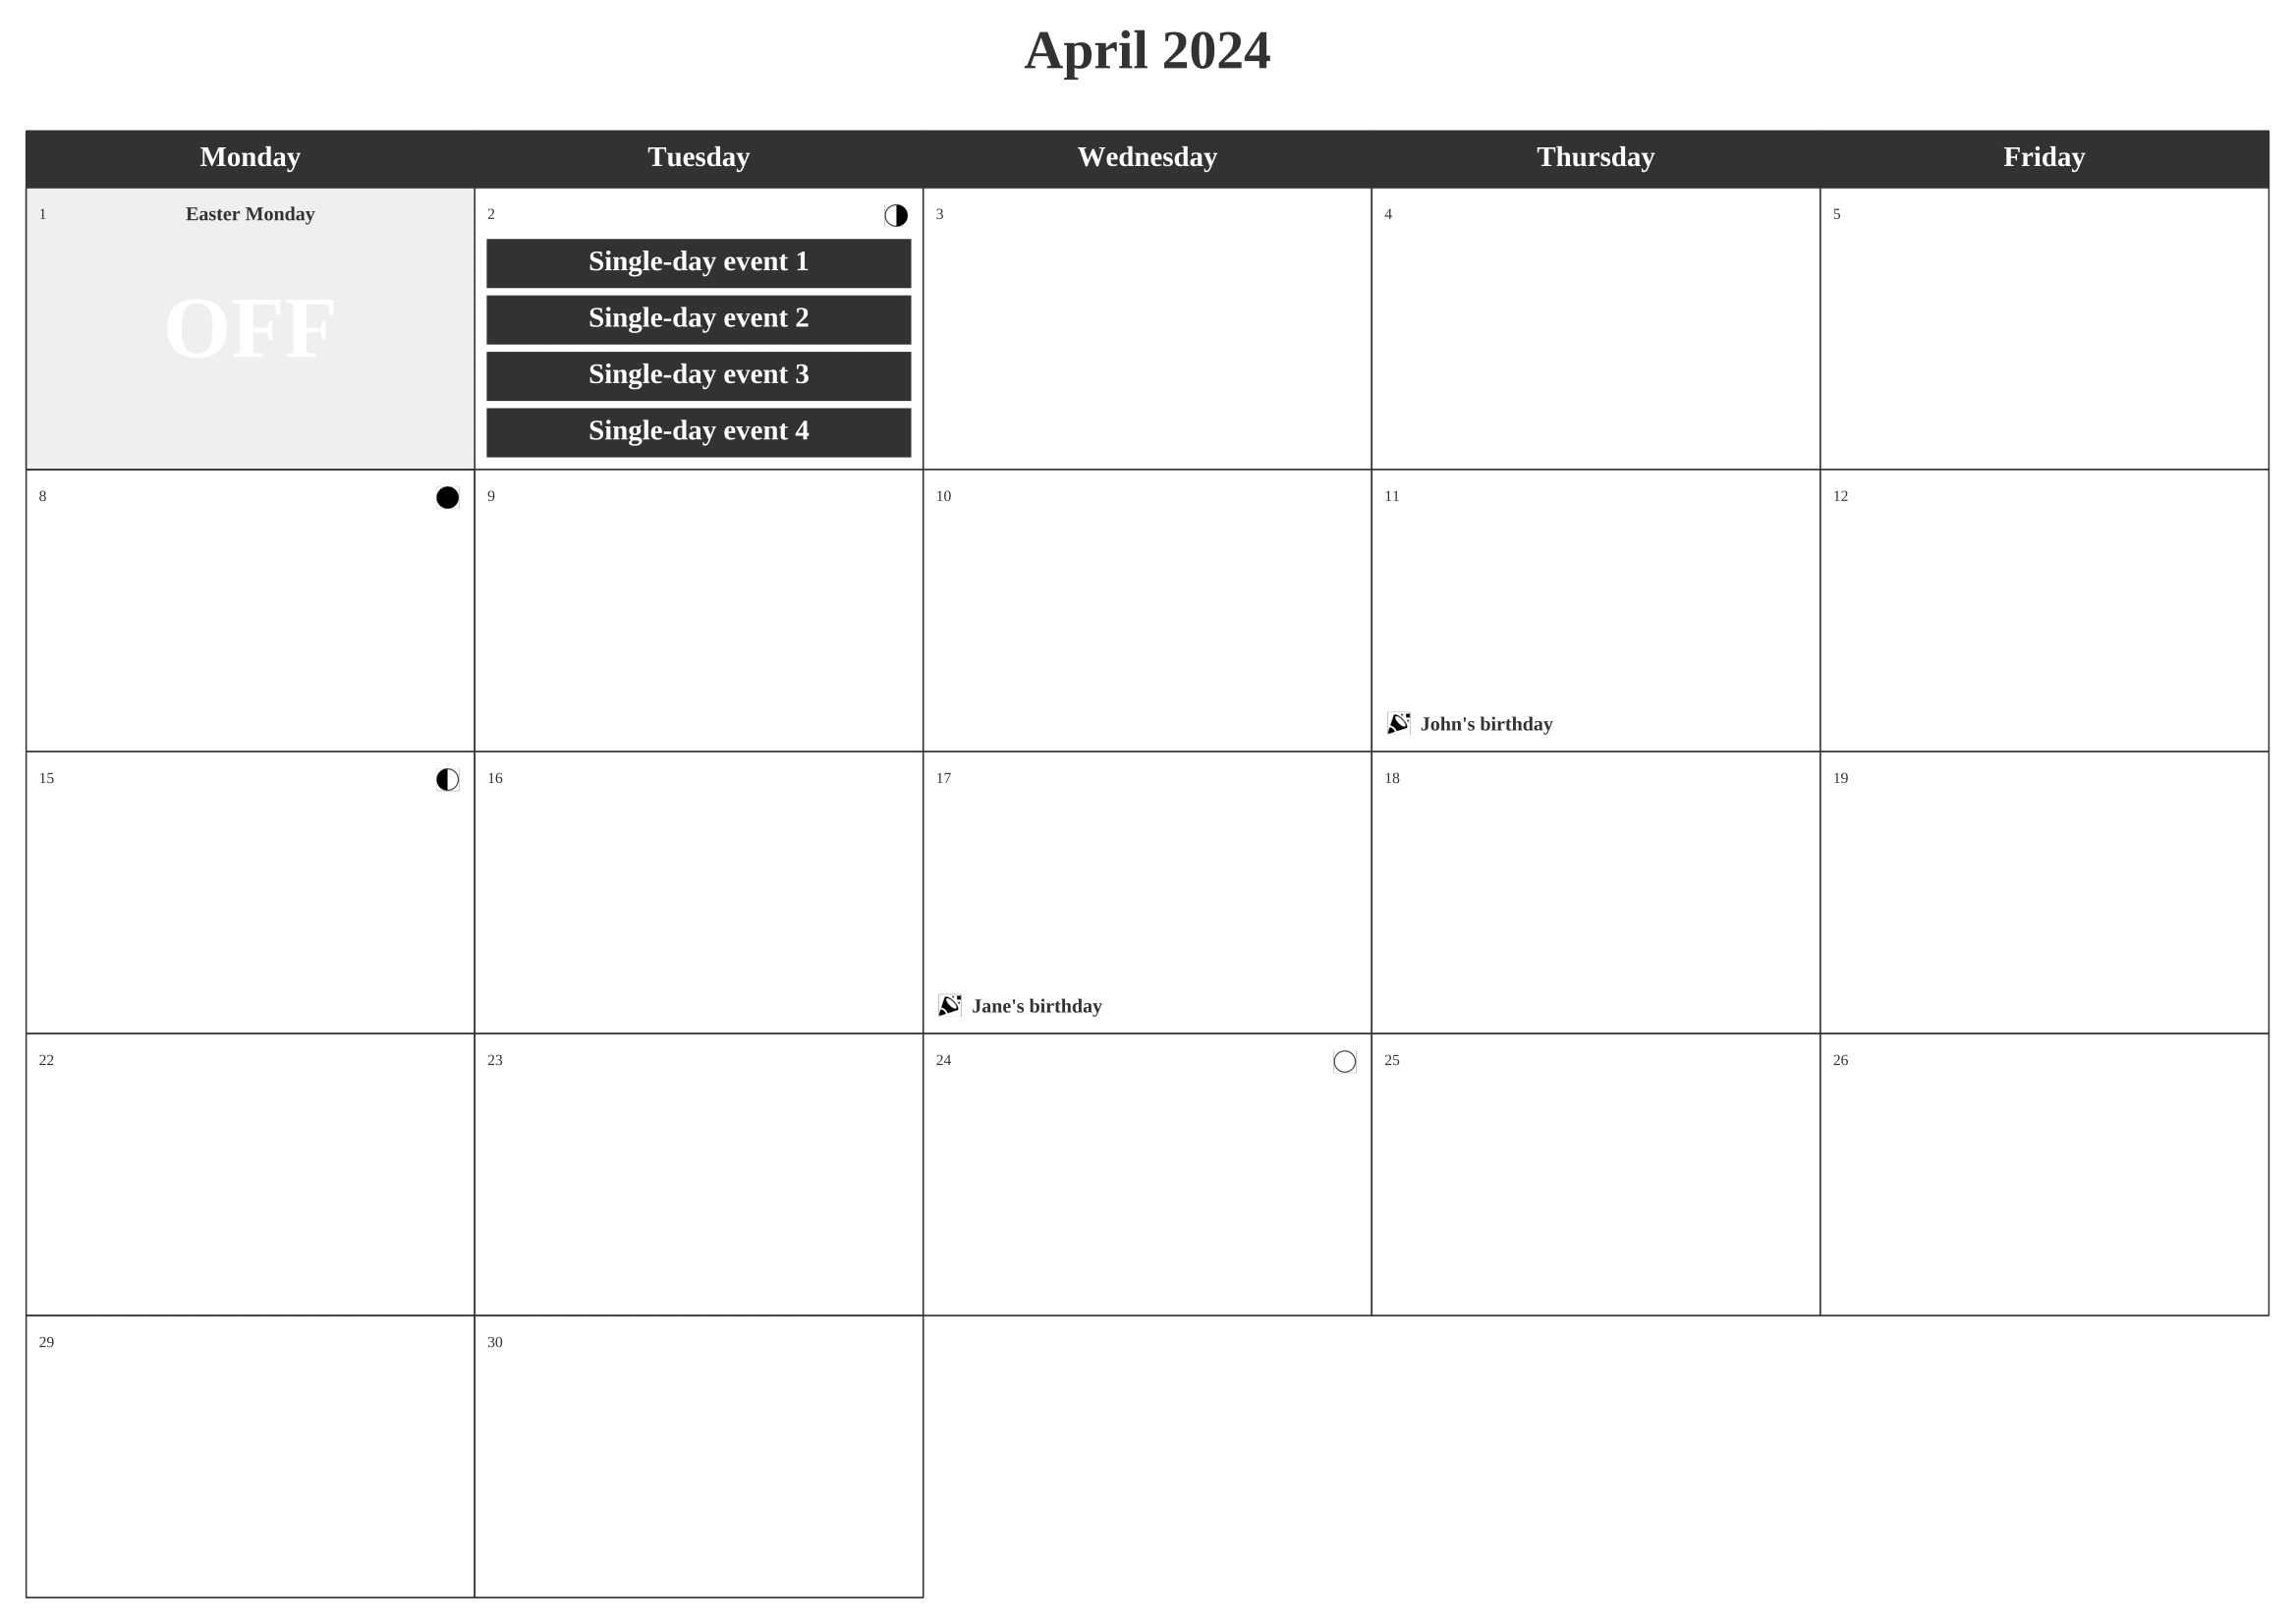 Monthly calendar - Single-day events